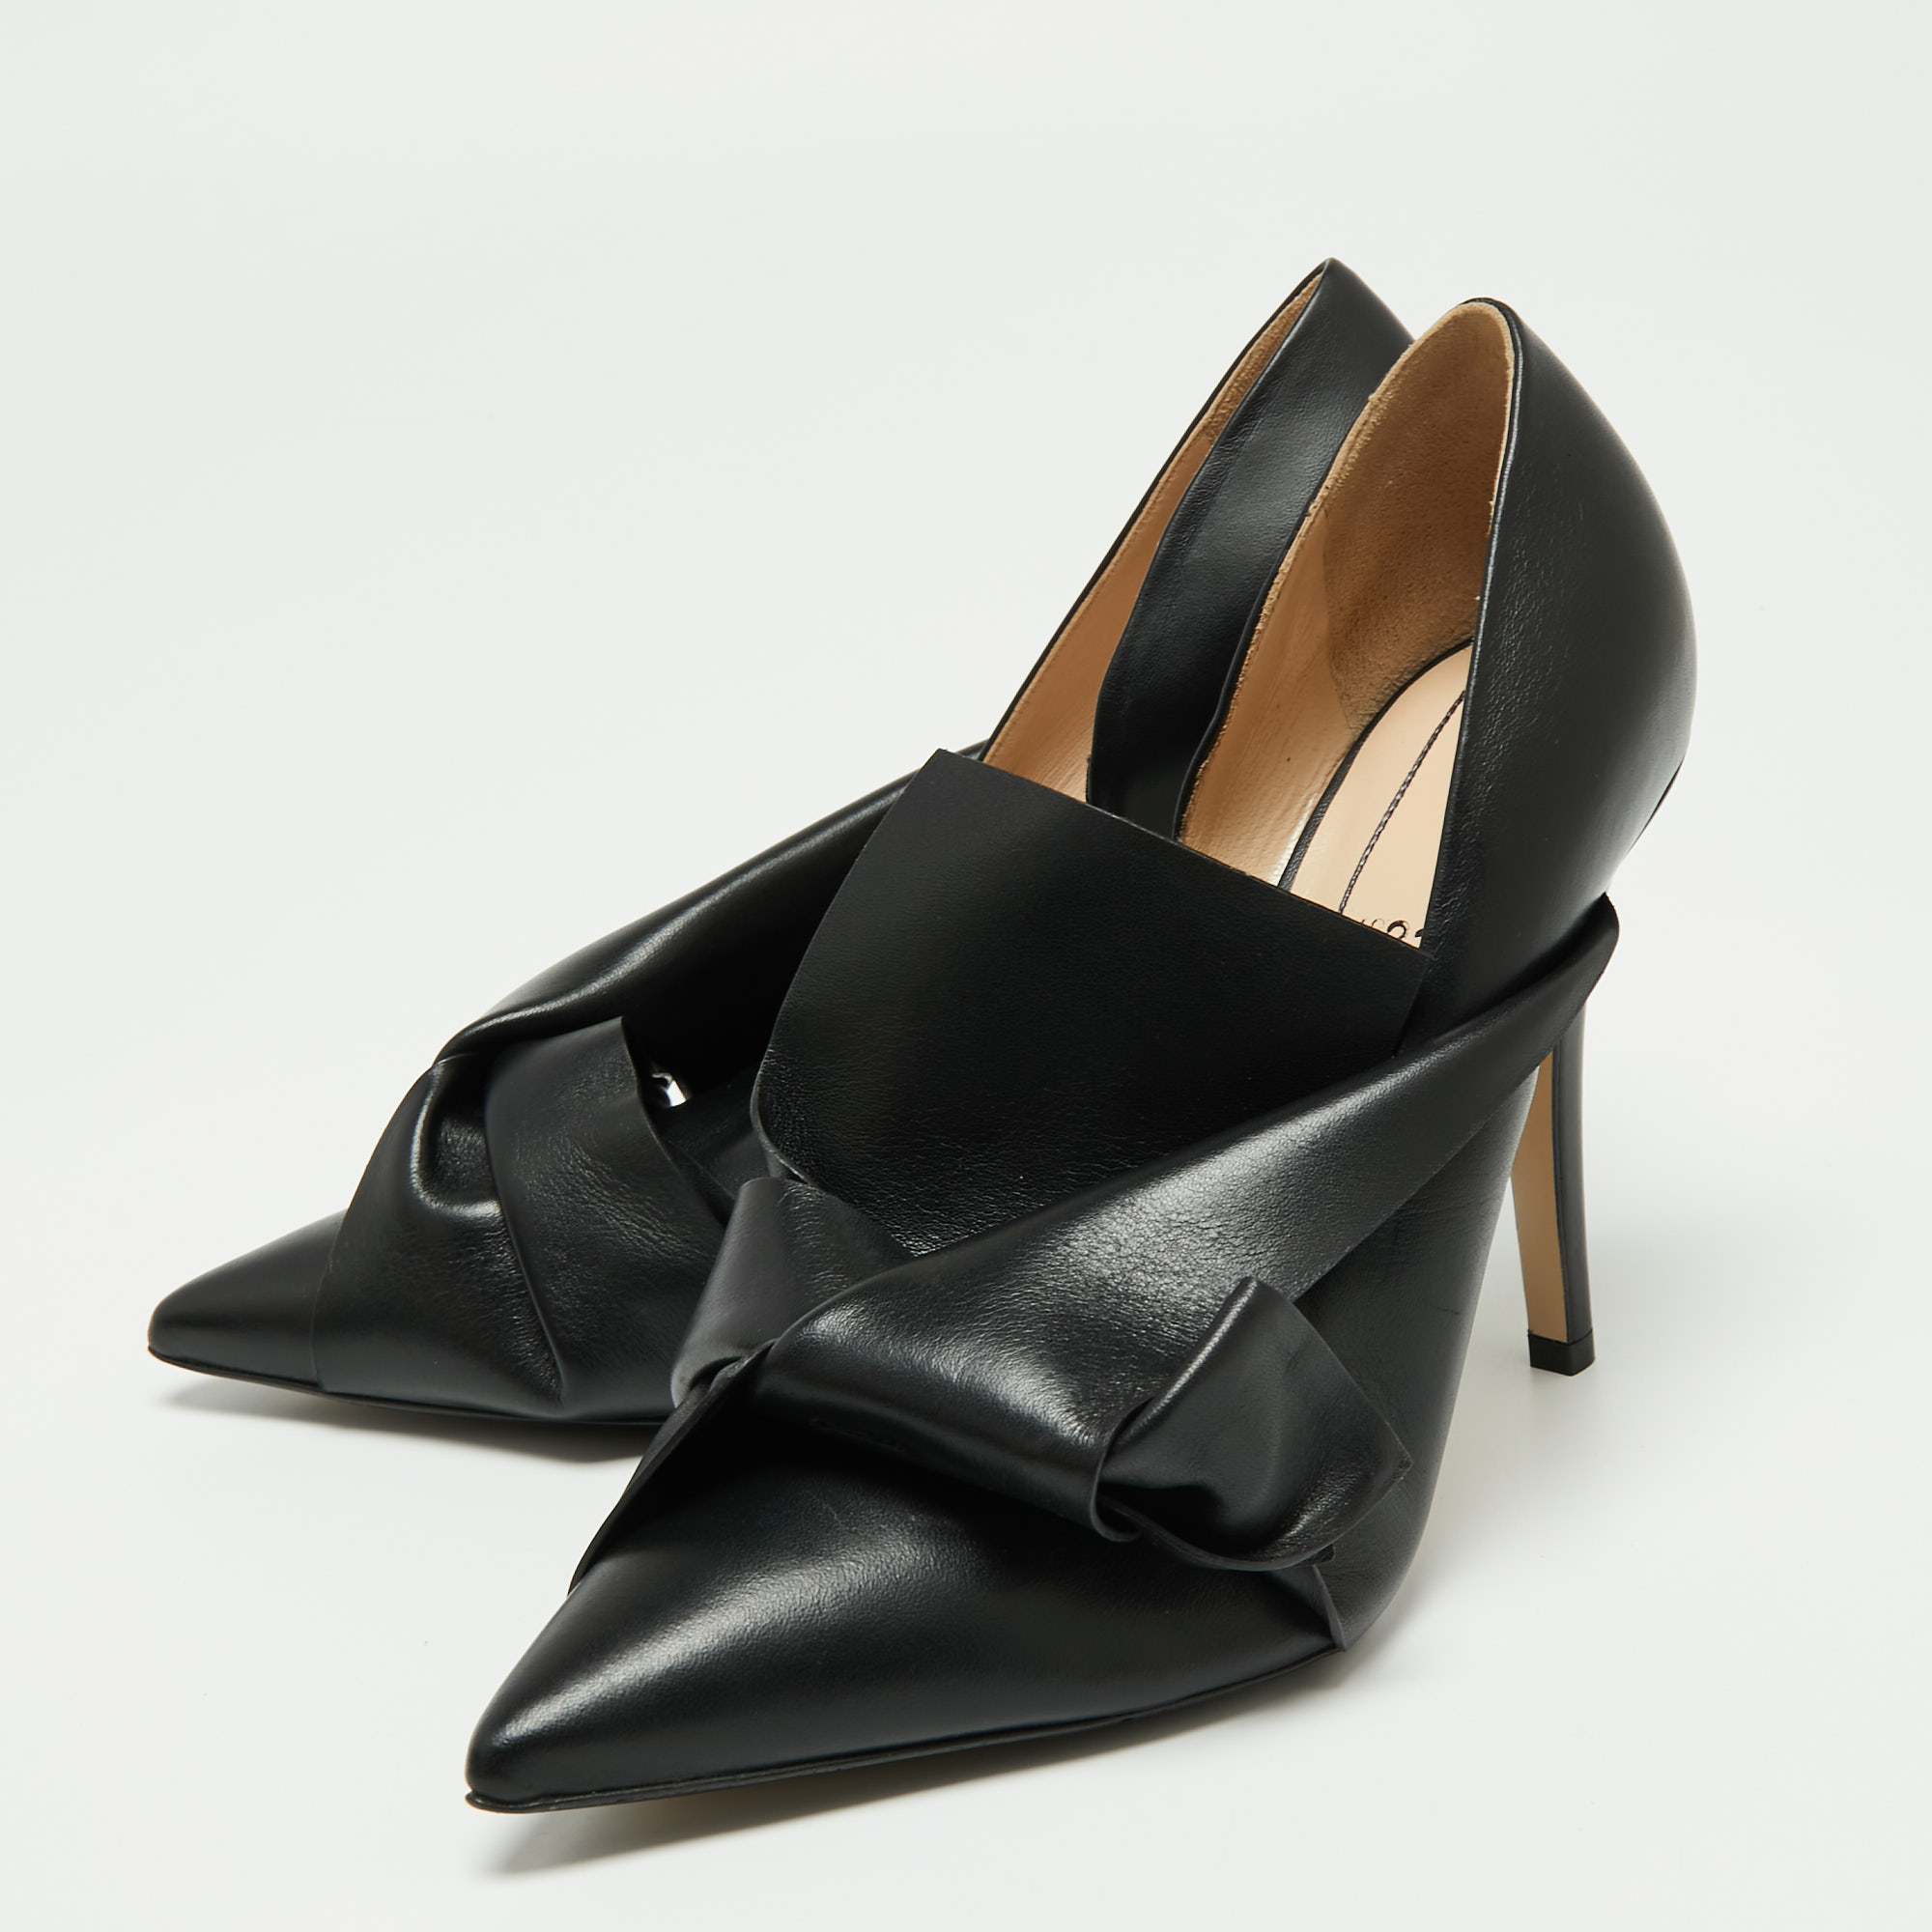 

N21 Black Leather Knot D'orsay Pointed Toe Pumps Size